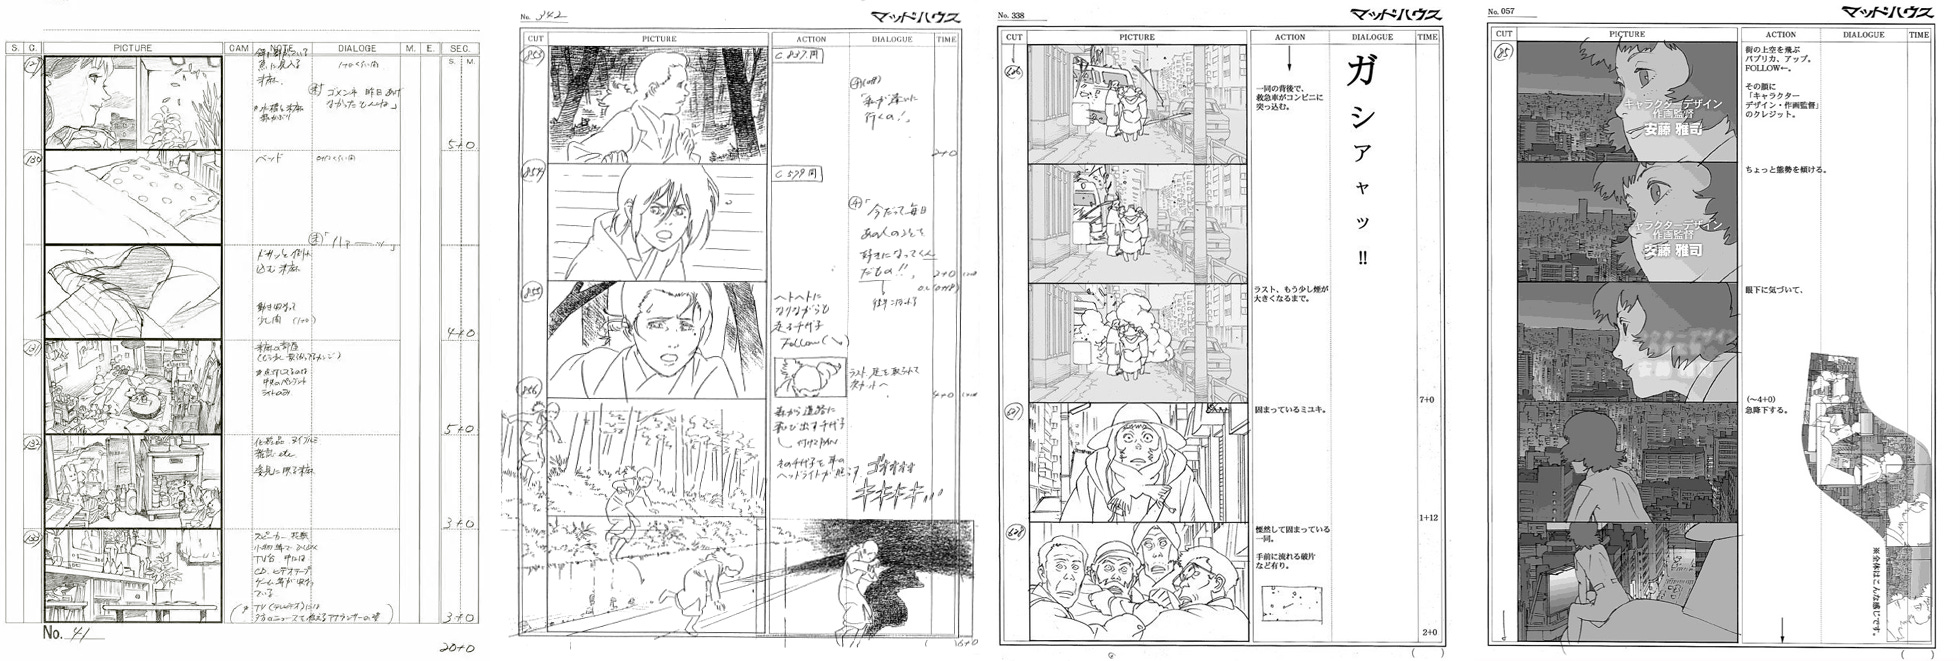 Anime Storyboard Template free download. by StormeonThePokemon on DeviantArt